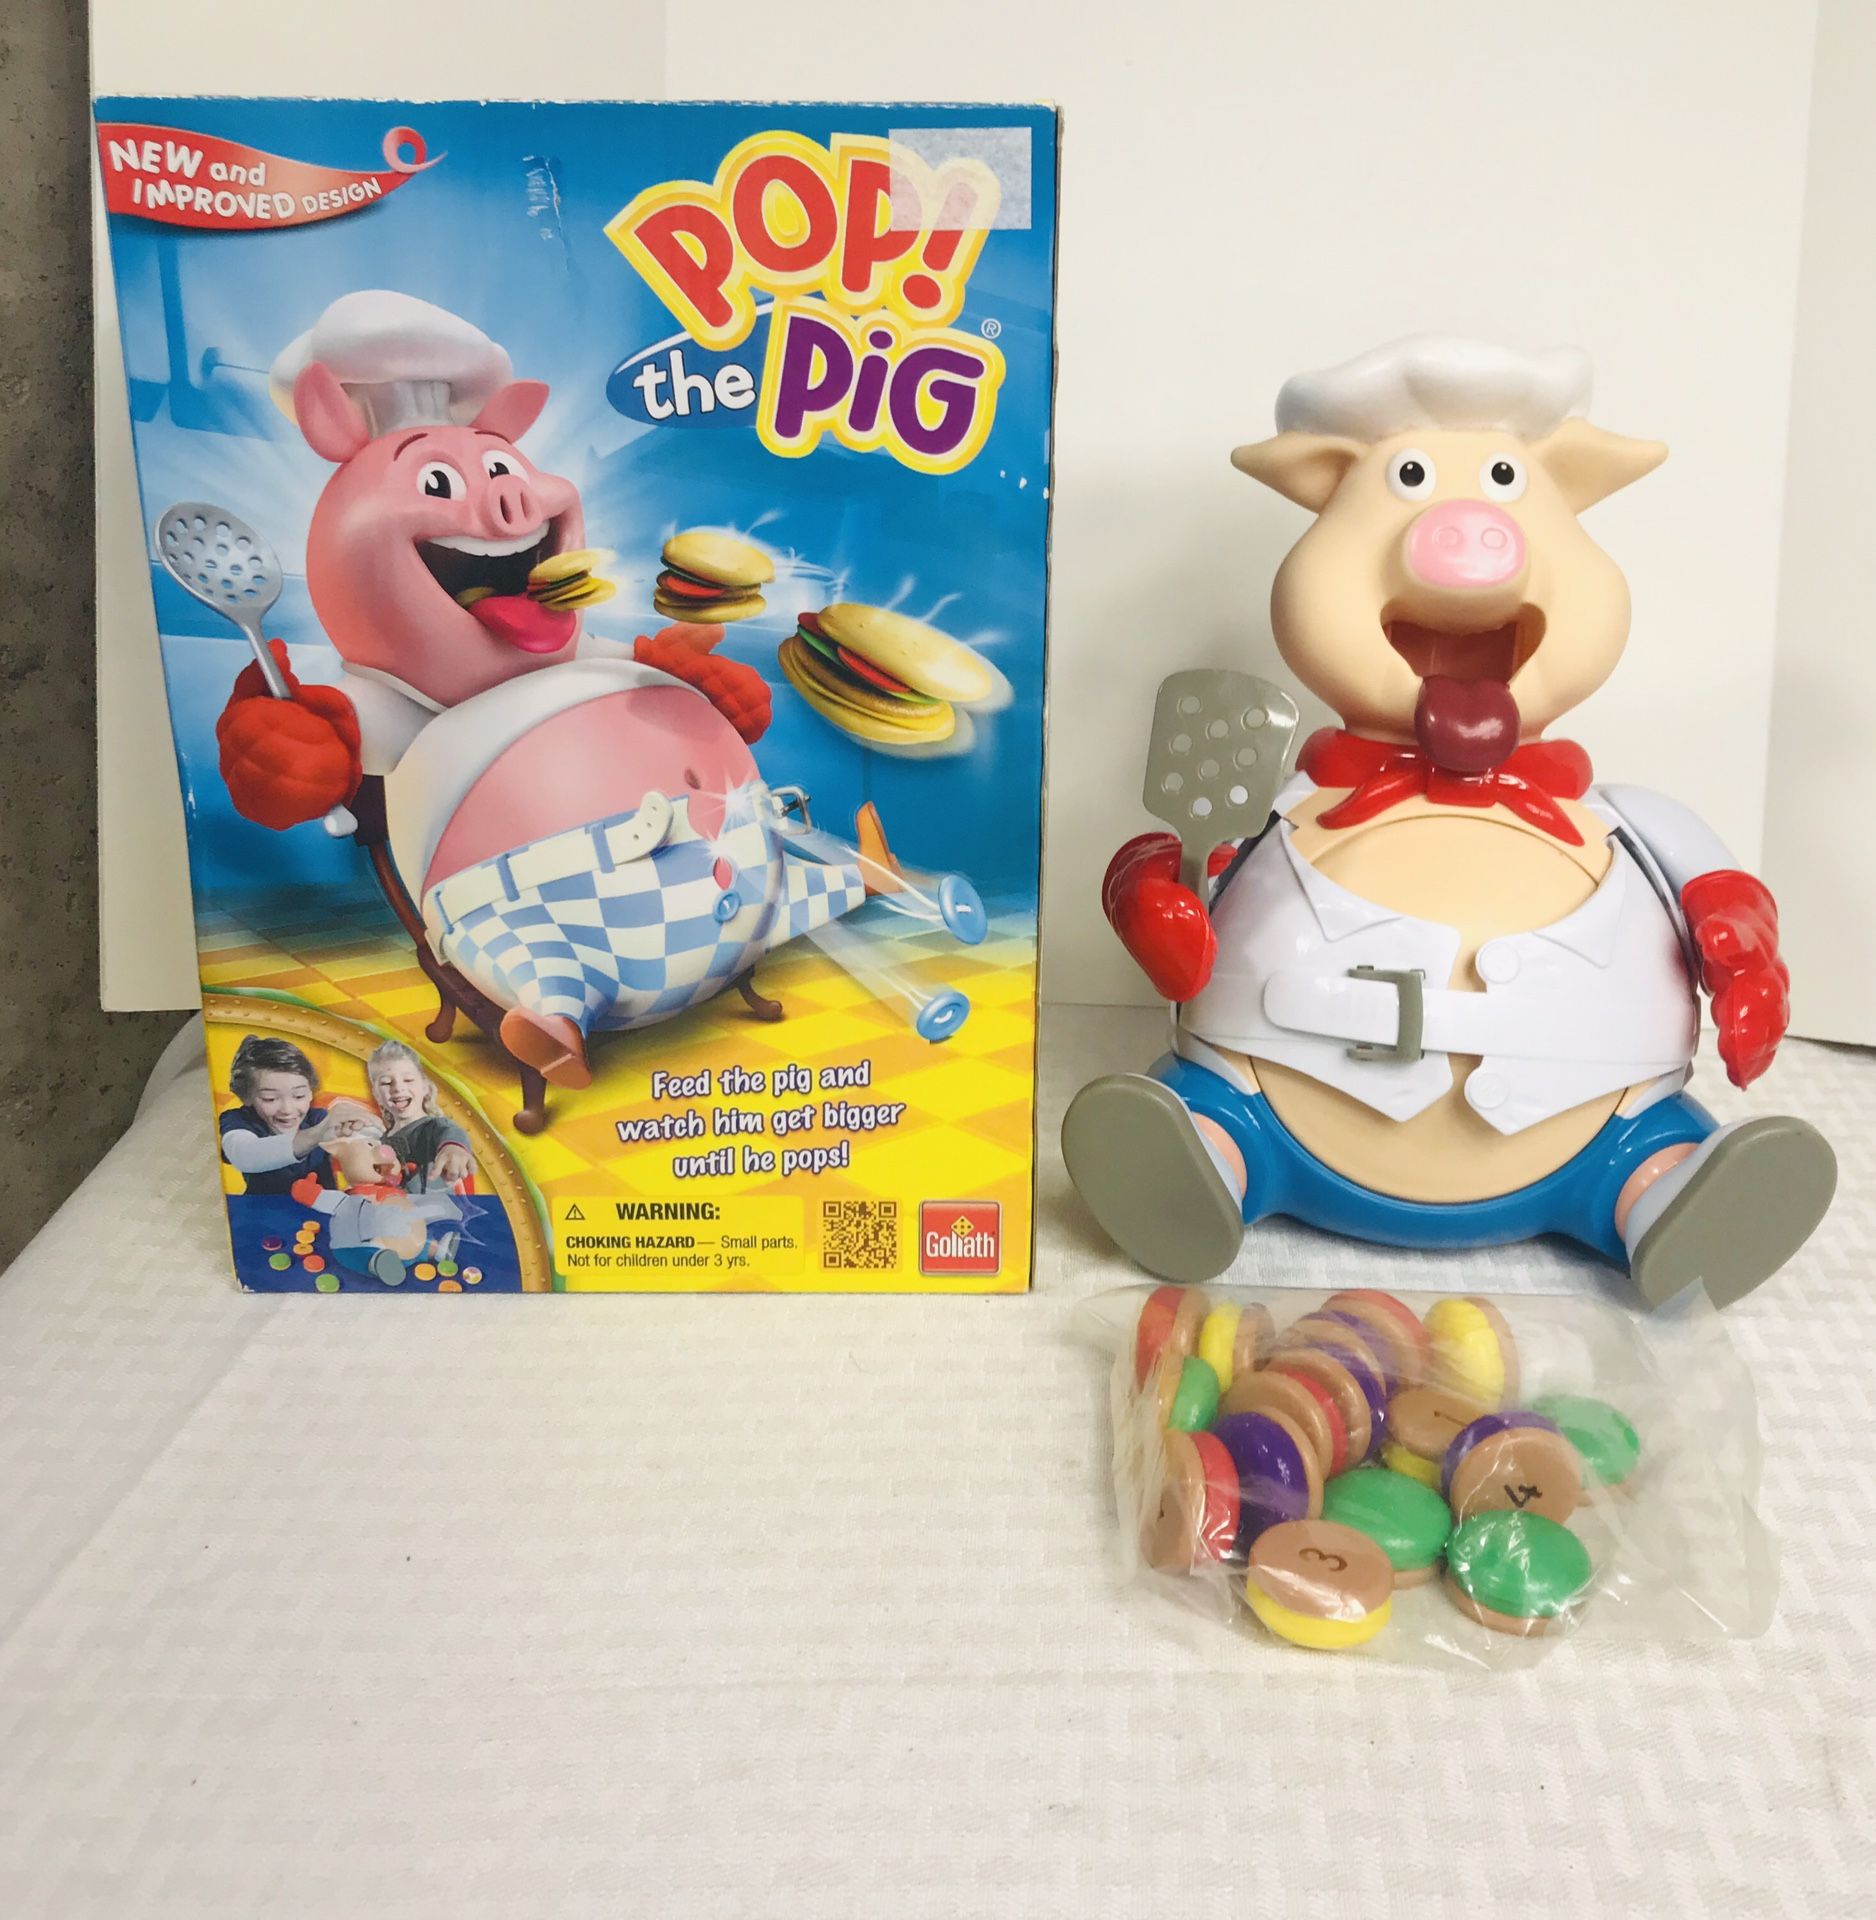 Goliath Games Pop The Pig Game